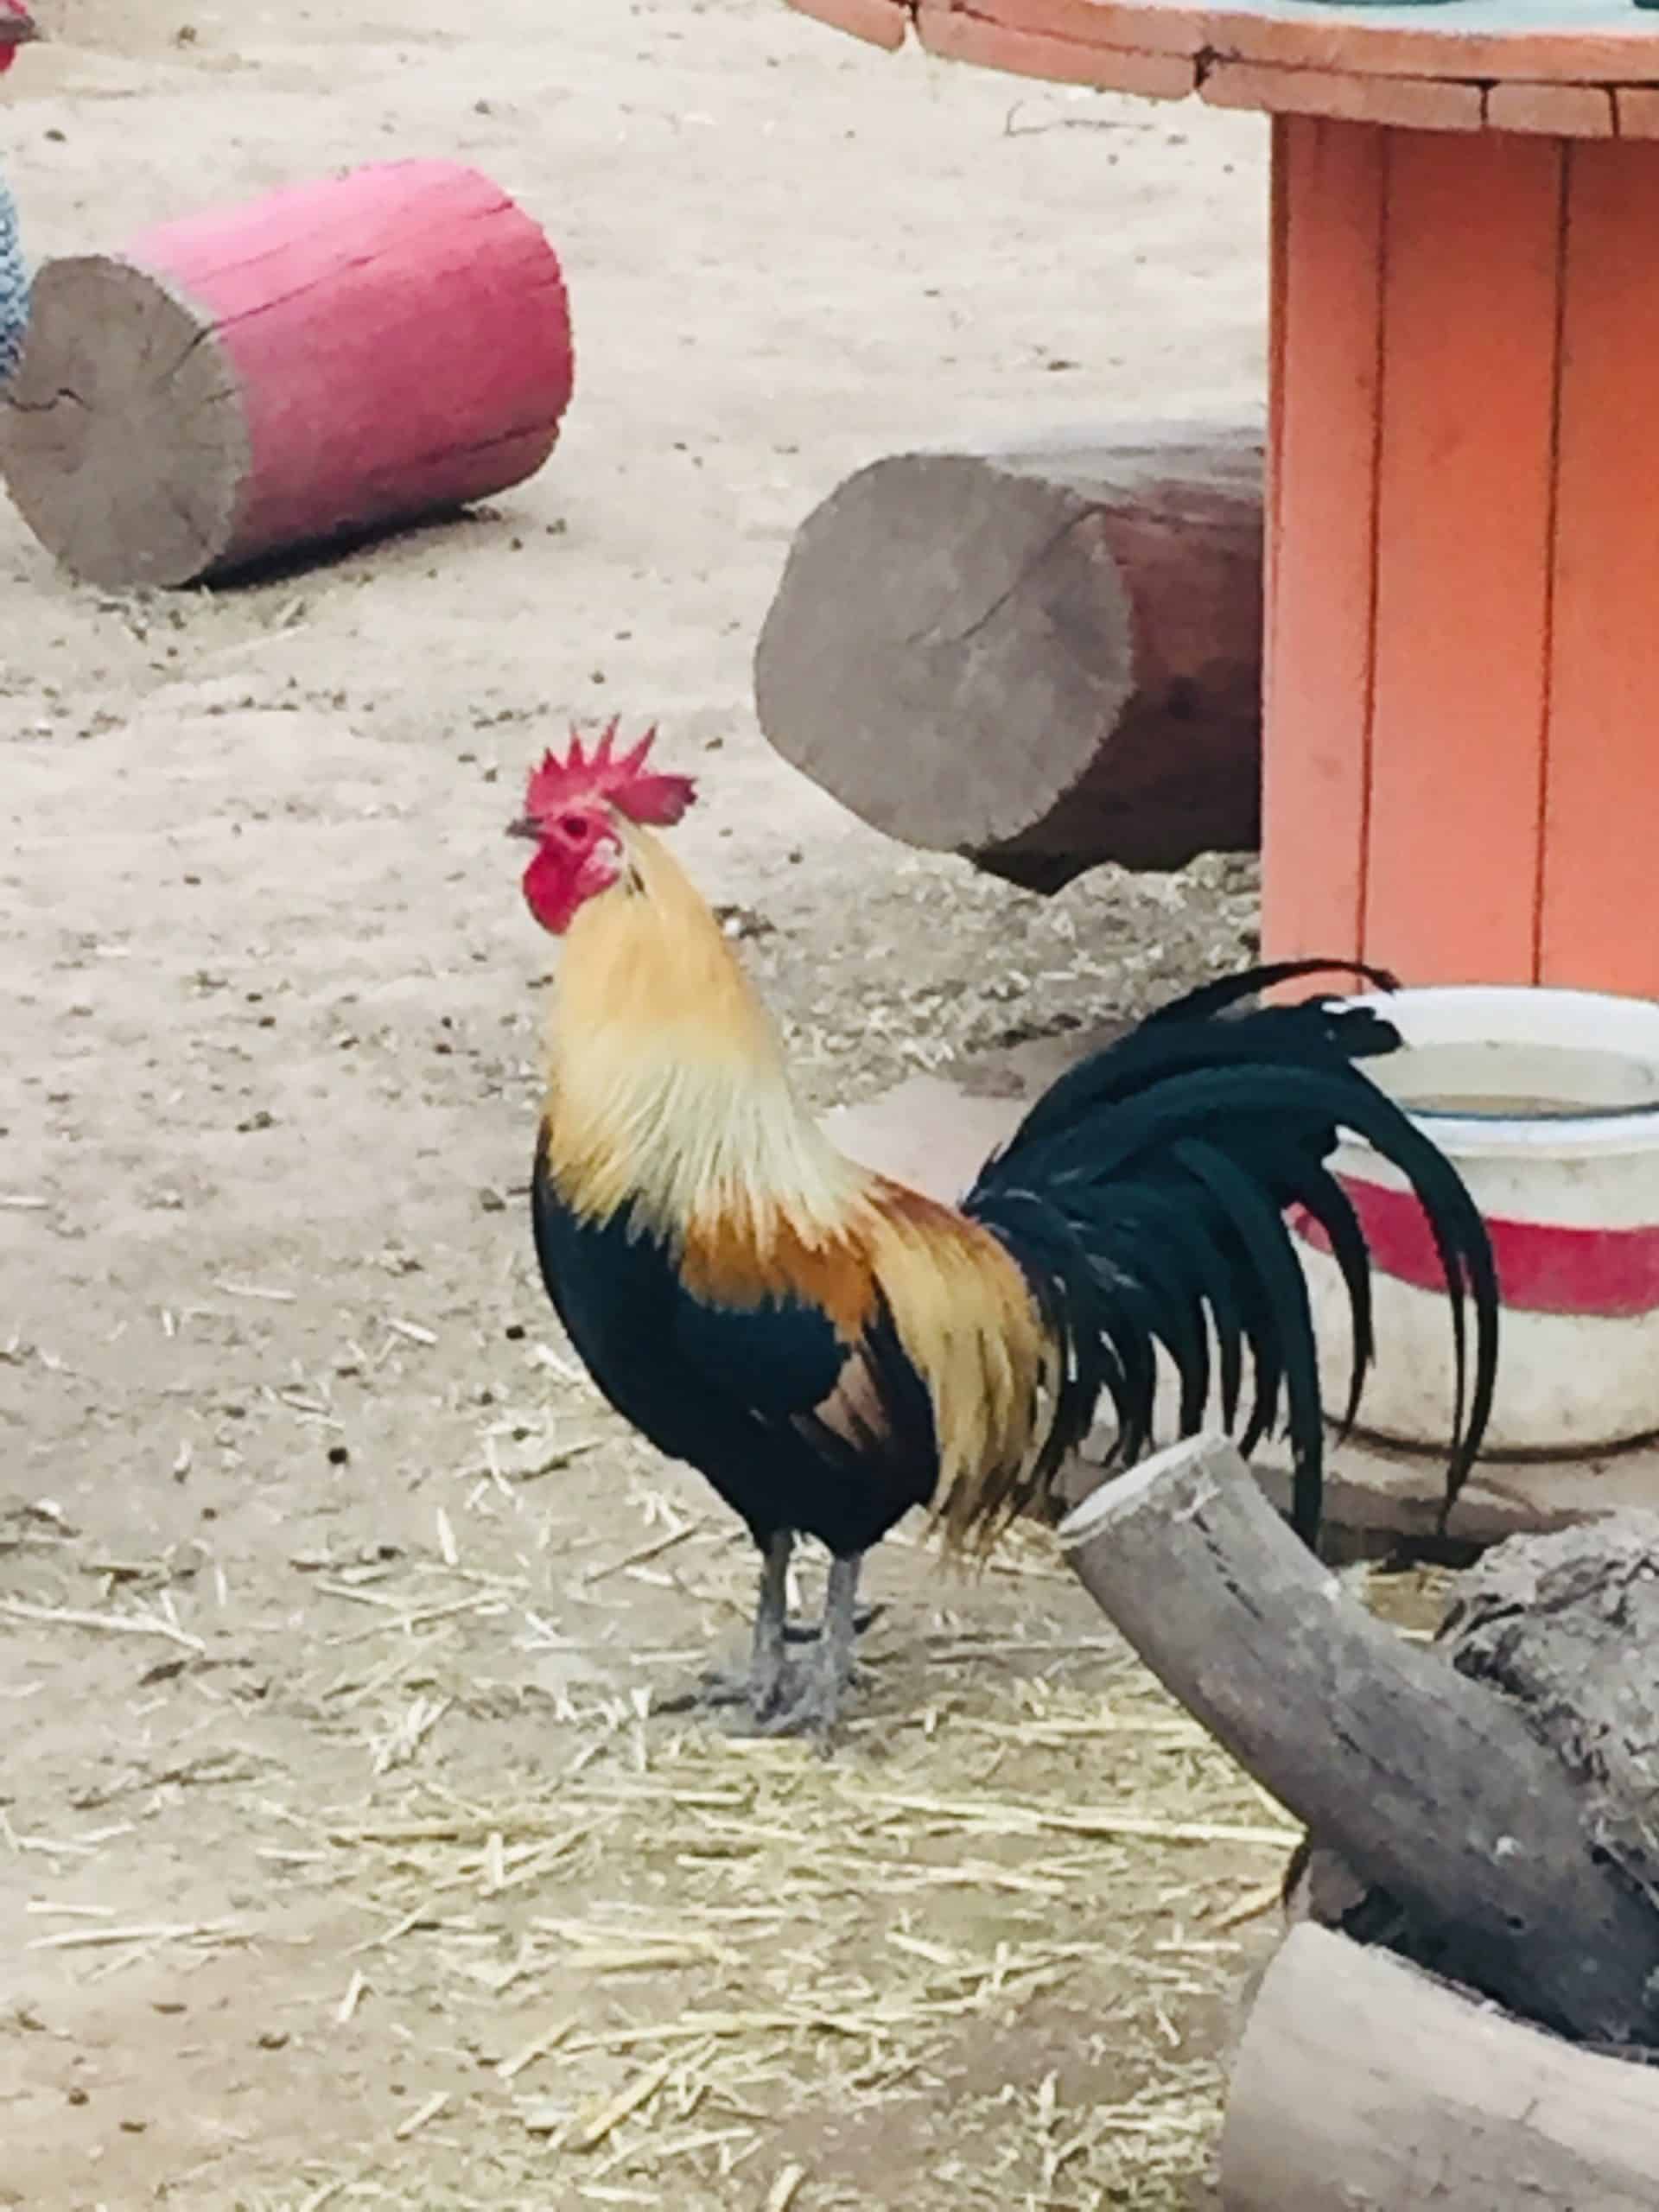 Why do roosters crow